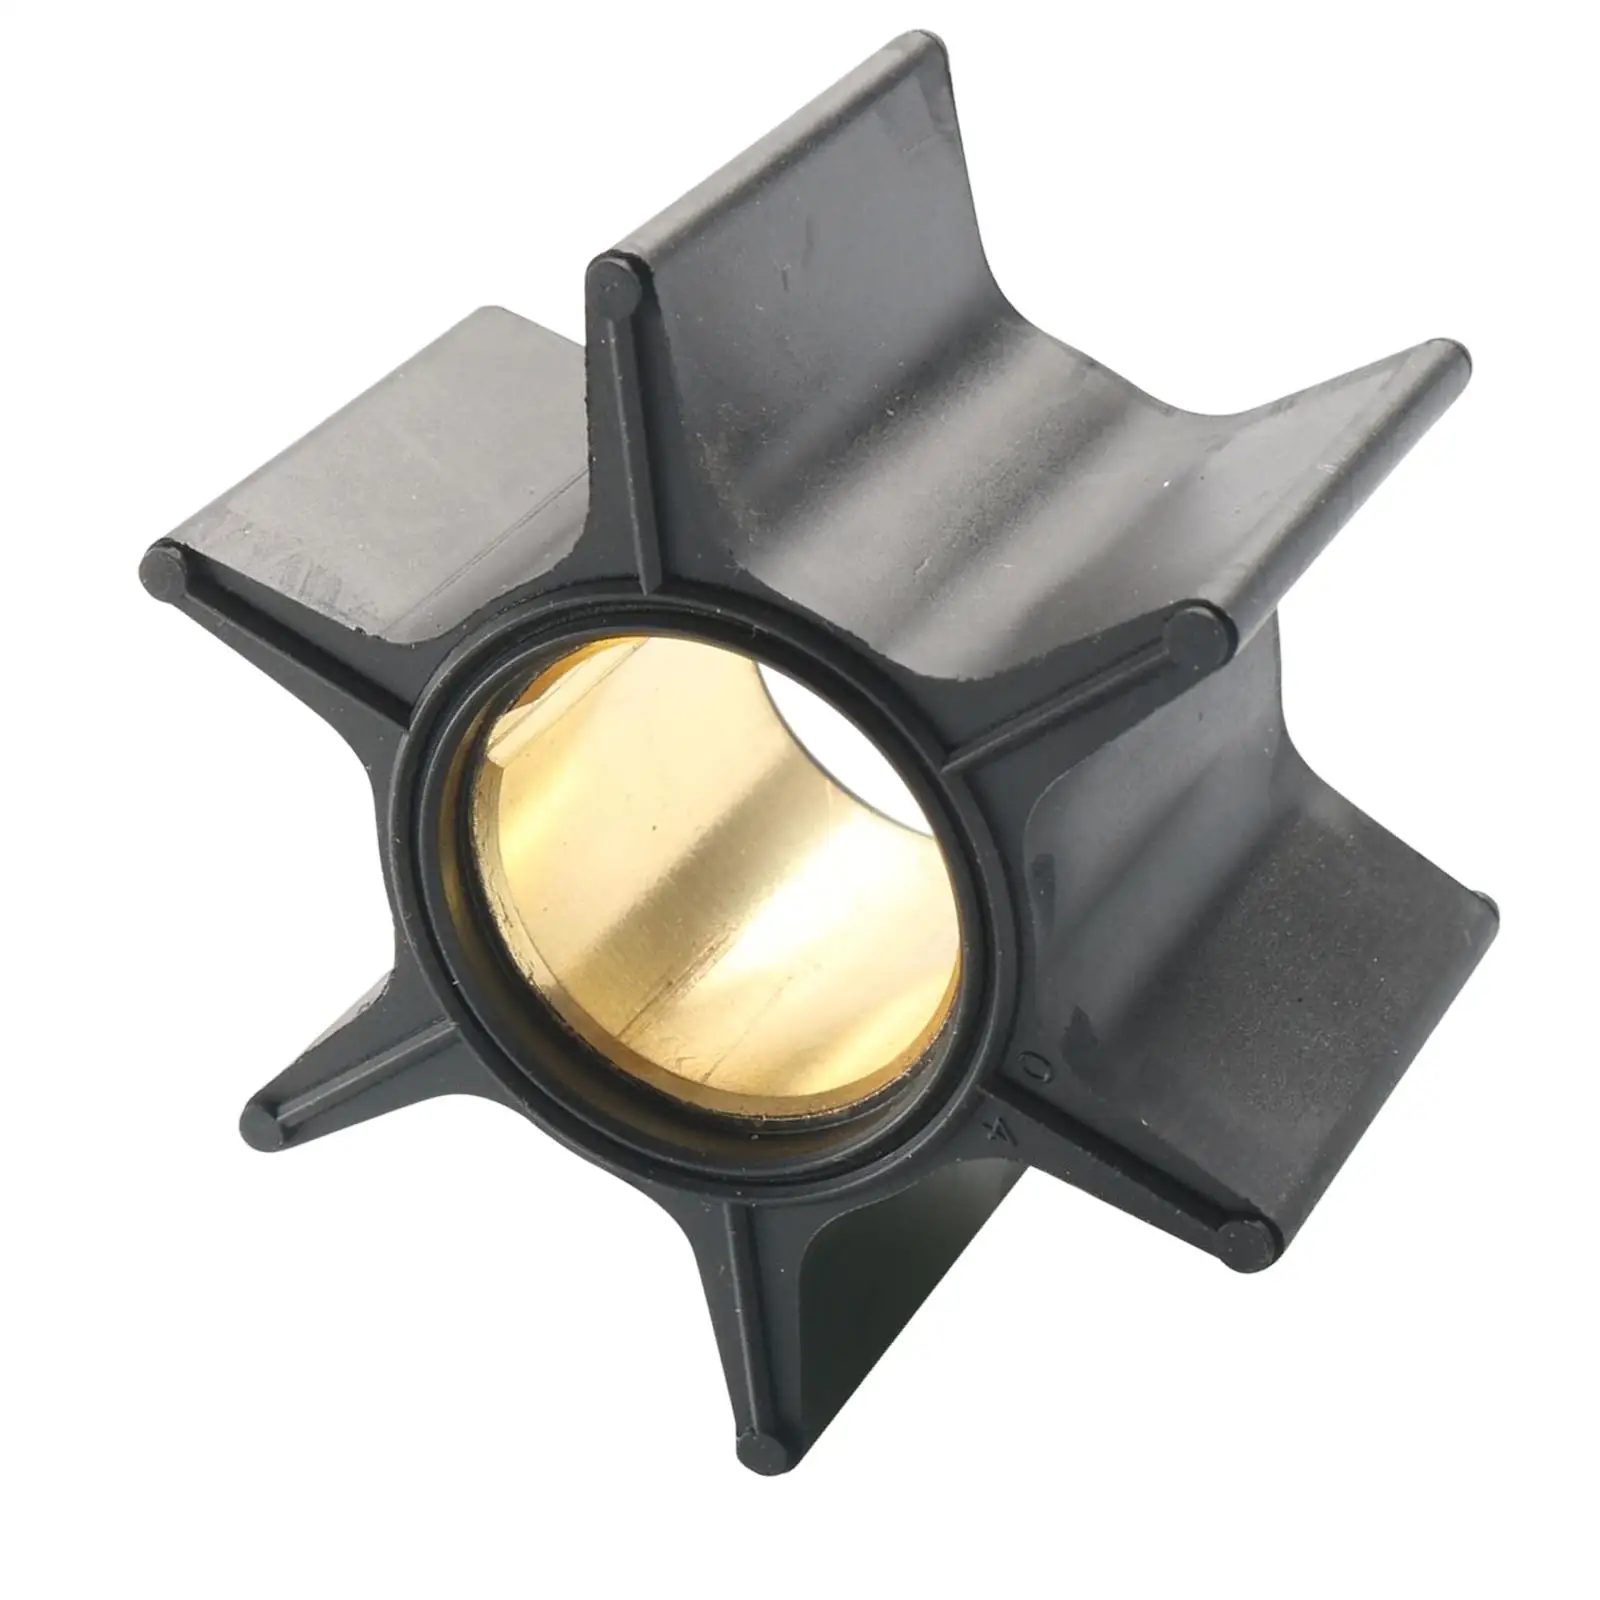 Water Pump Impeller 4789984T4 47-89984T4 Repair Kit Fit for Mercury Replaces Accessories High Performance Spare Parts